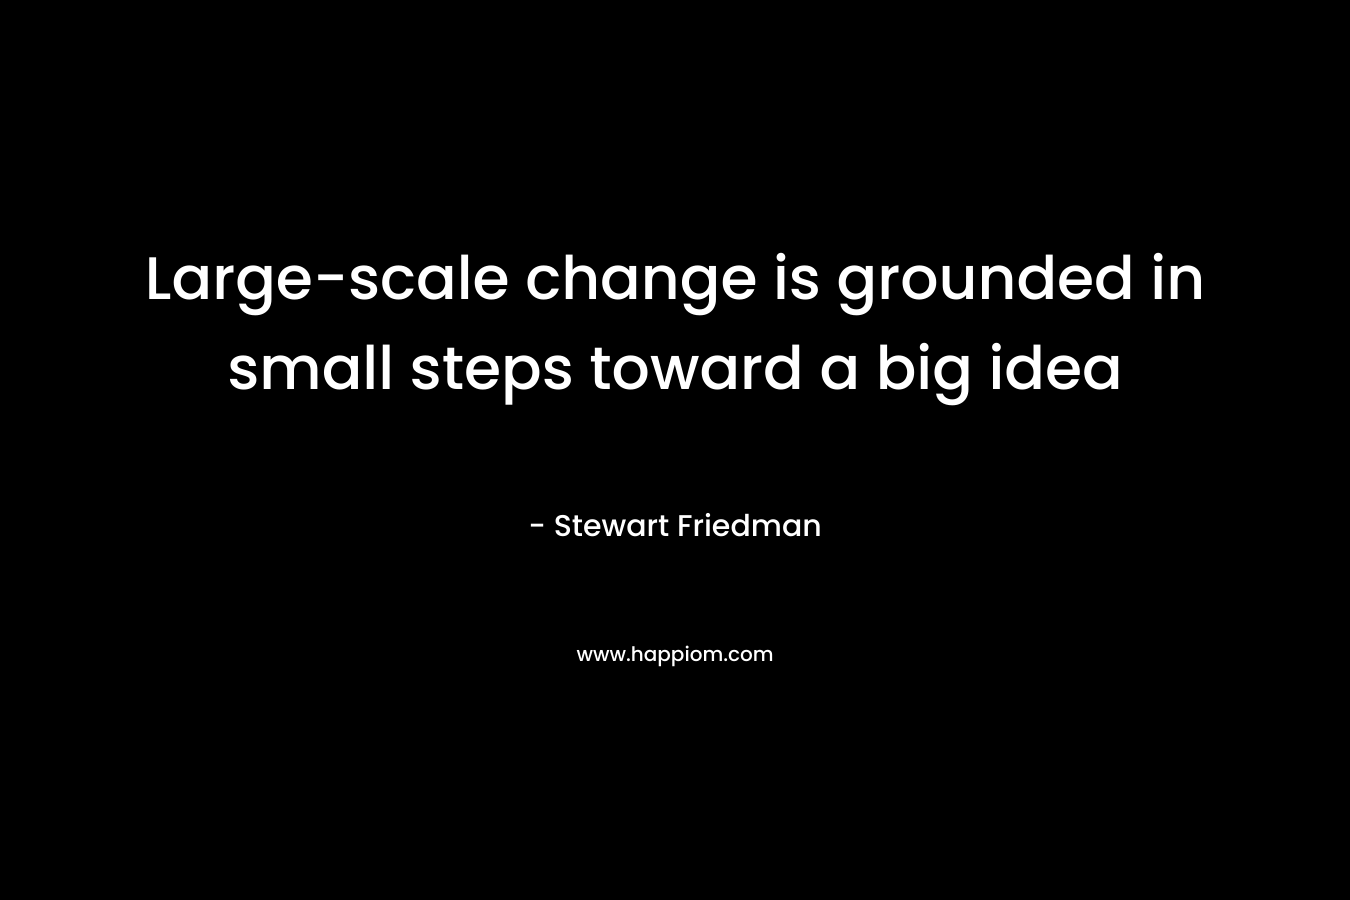 Large-scale change is grounded in small steps toward a big idea